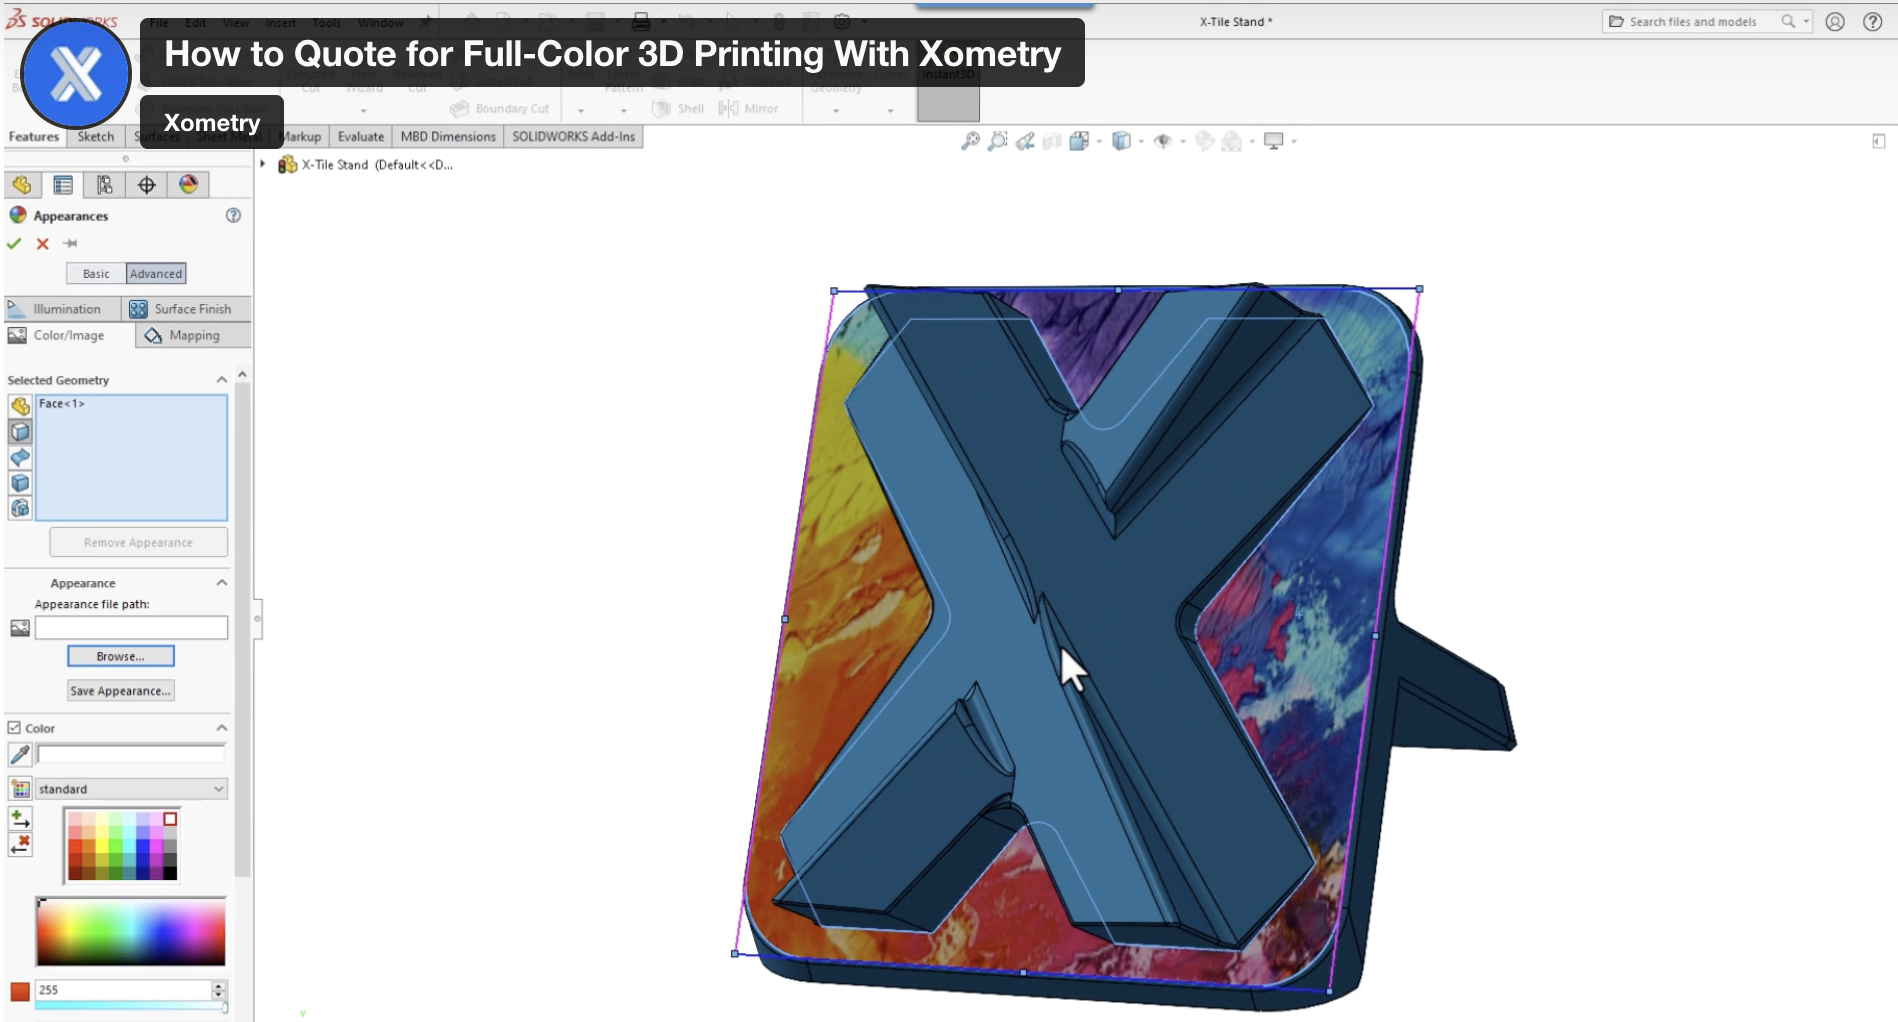 How to Prepare 3MF for Full Color 3D Printing with Xometry from SOLIDWORKS